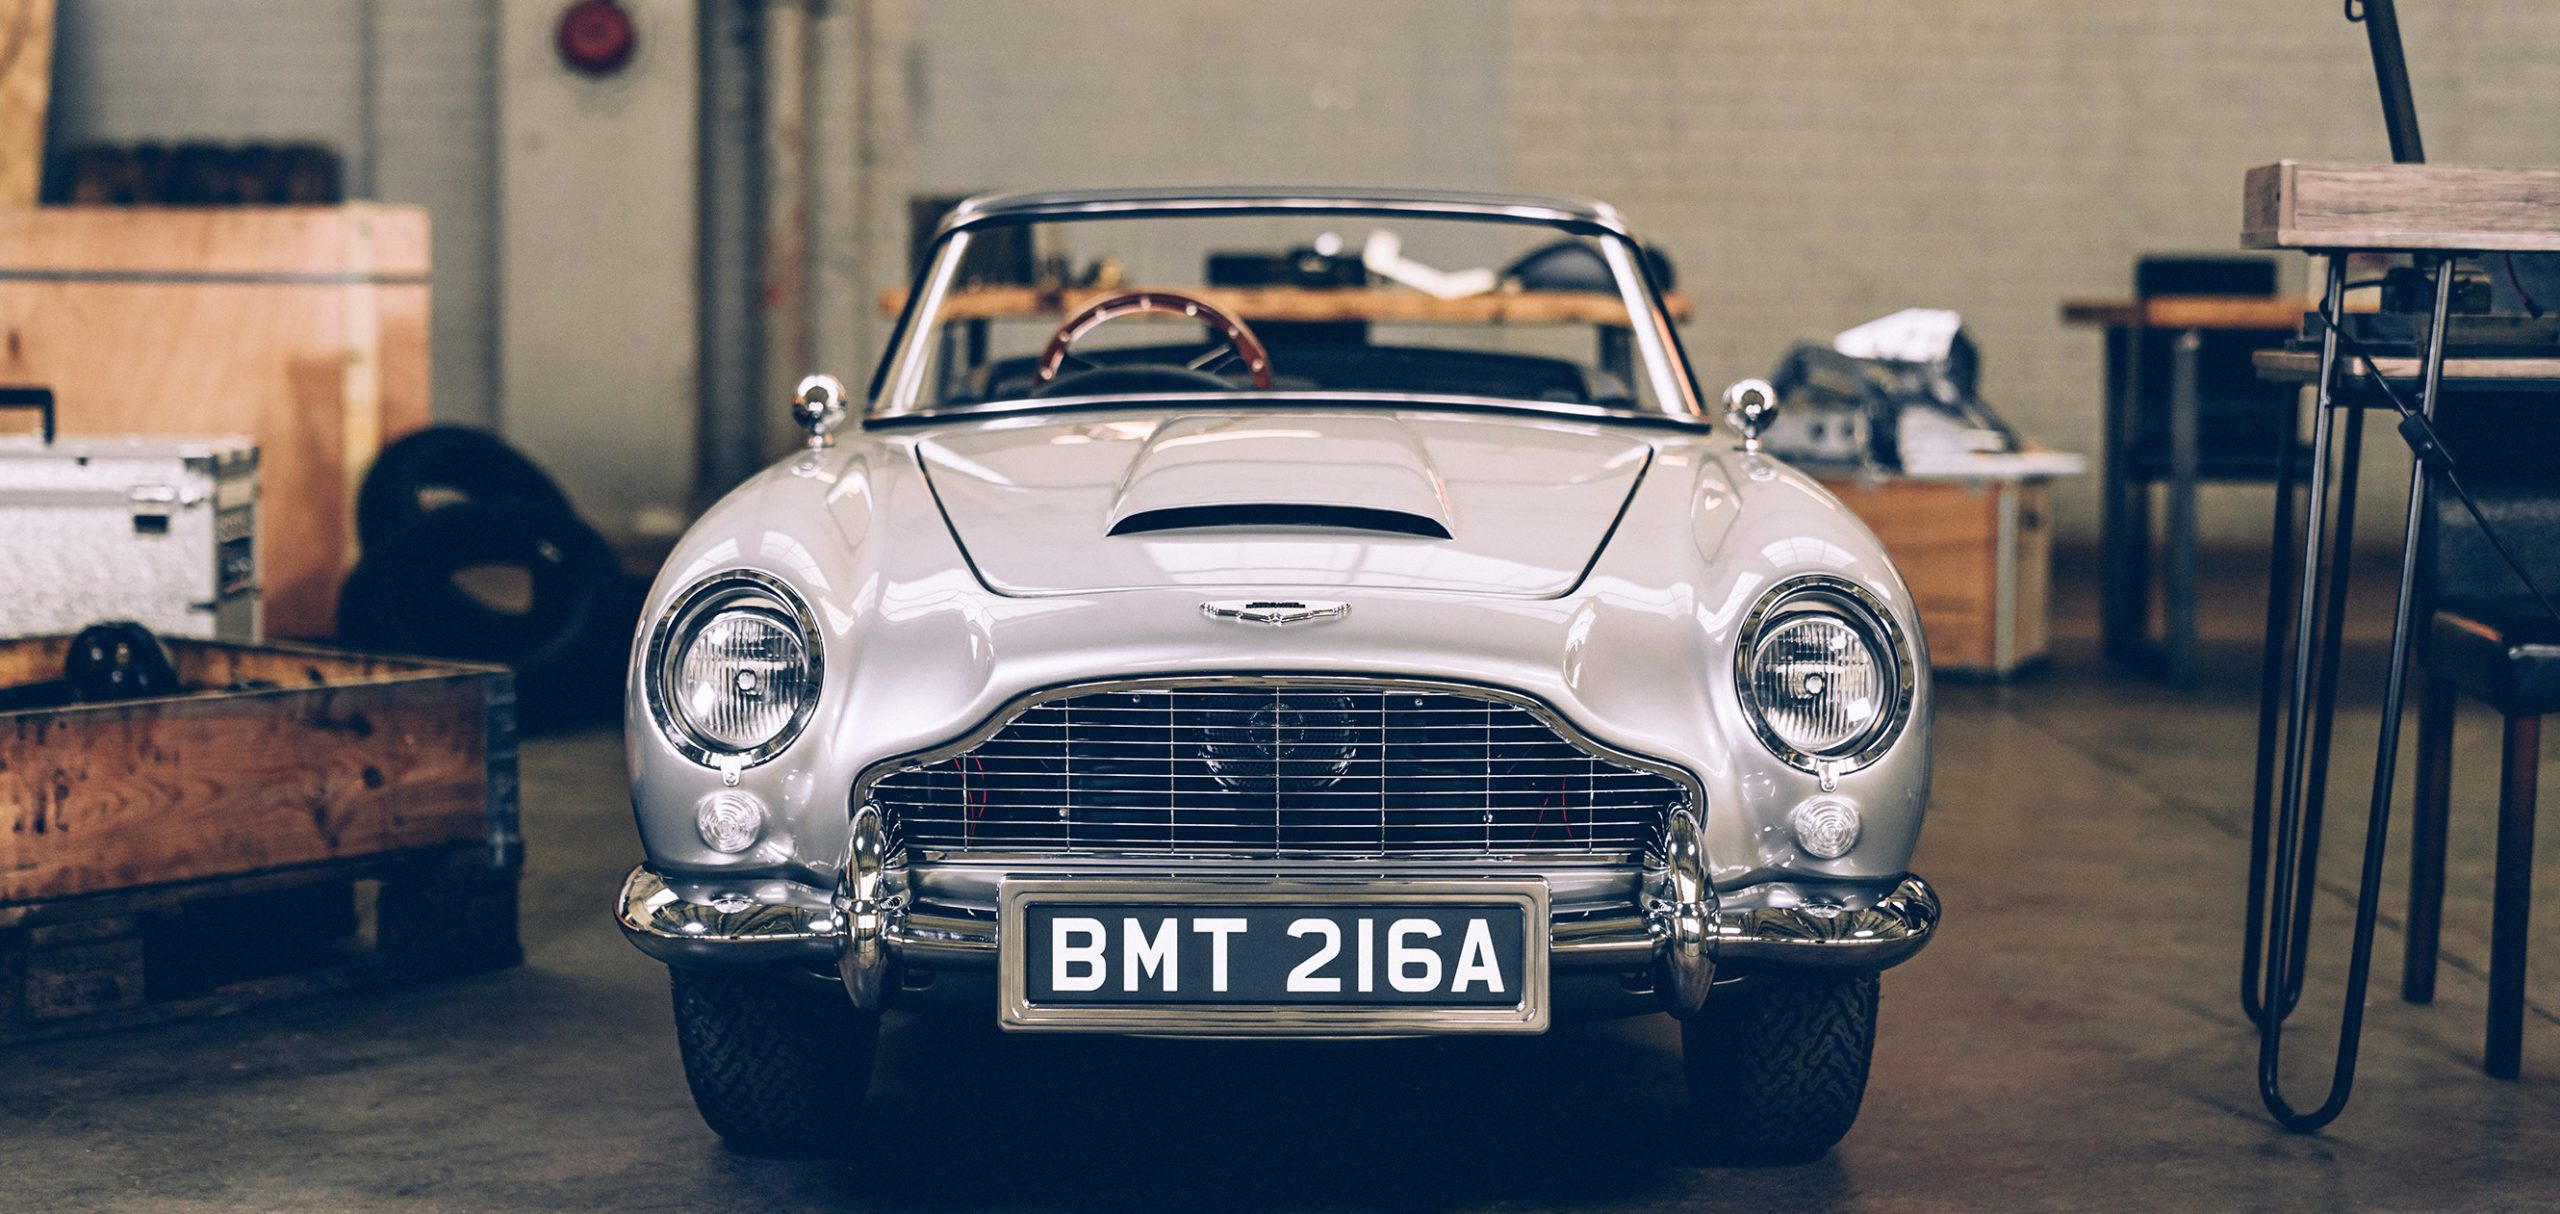 Driving JAMES BOND'S Aston Martin DB5 with all the WORKING GADGETS! 